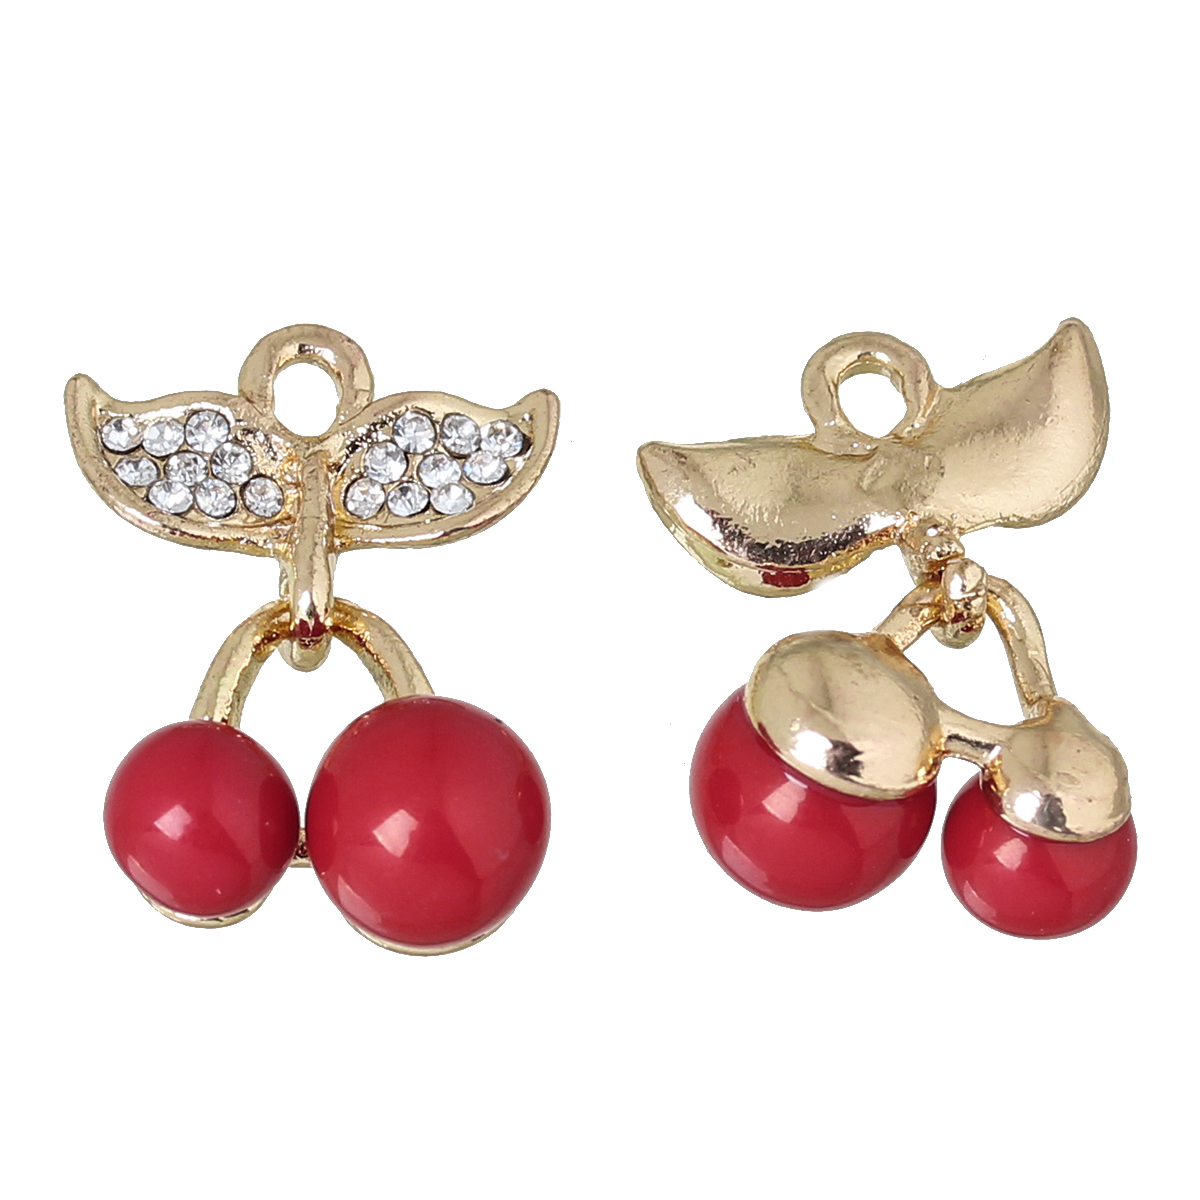 Picture of Zinc Based Alloy Charms Cherry Fruit Light Golden Red Clear Rhinestone 23mm( 7/8") x 15mm( 5/8"), 5 PCs